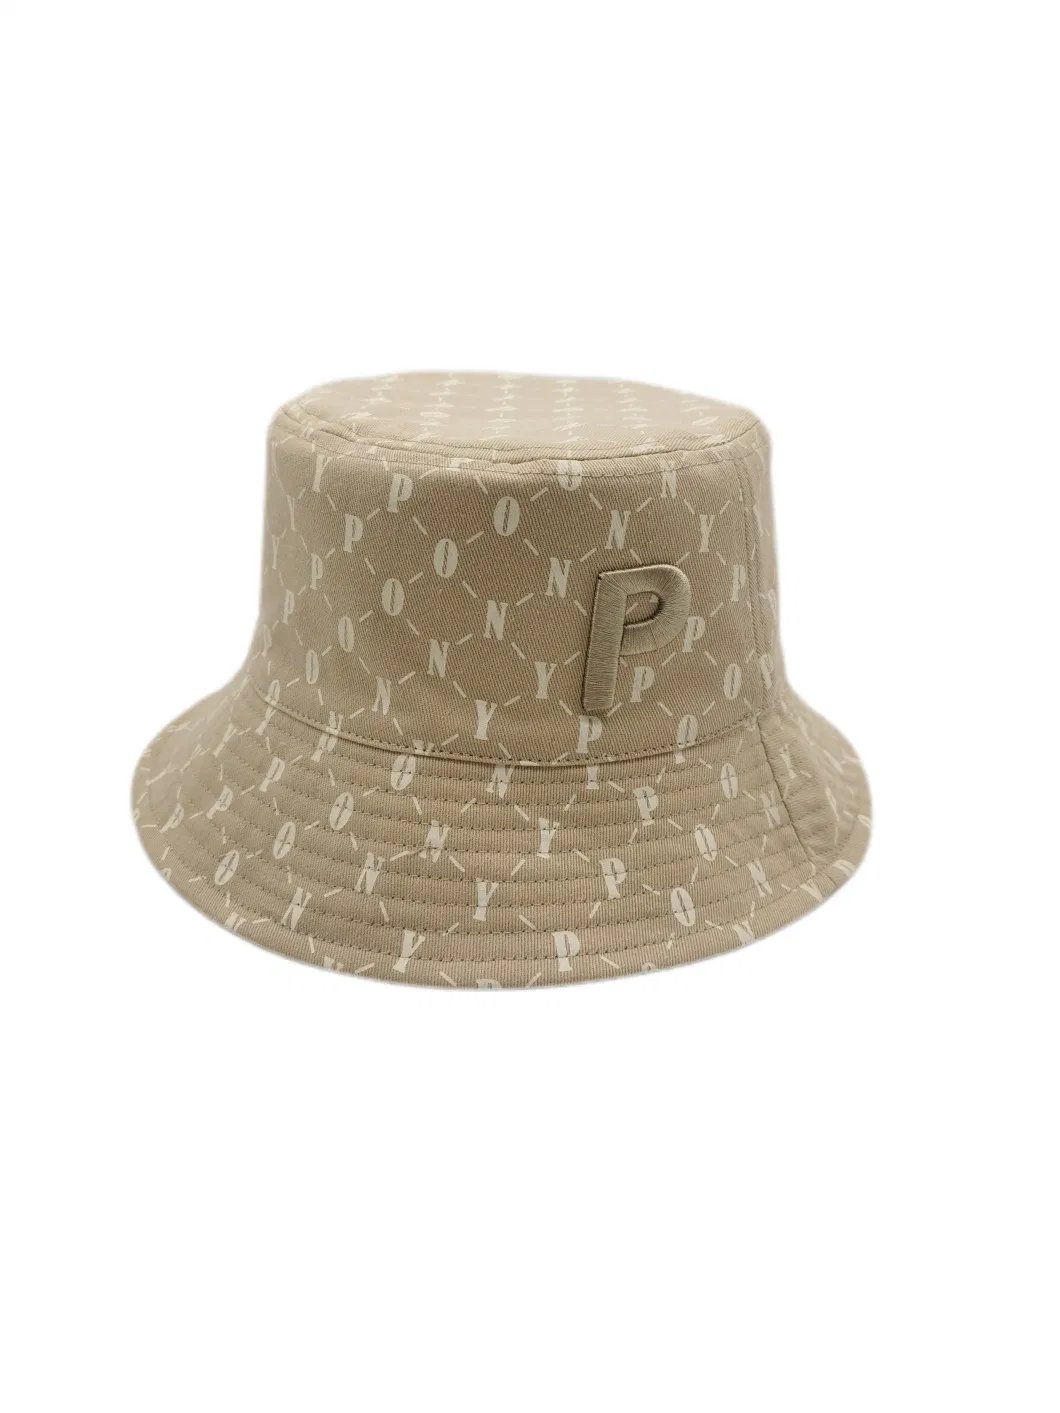 Customized Bucket Hat with Embroidery Reversible Printing Cotton Fishman Hat Fashion Hat